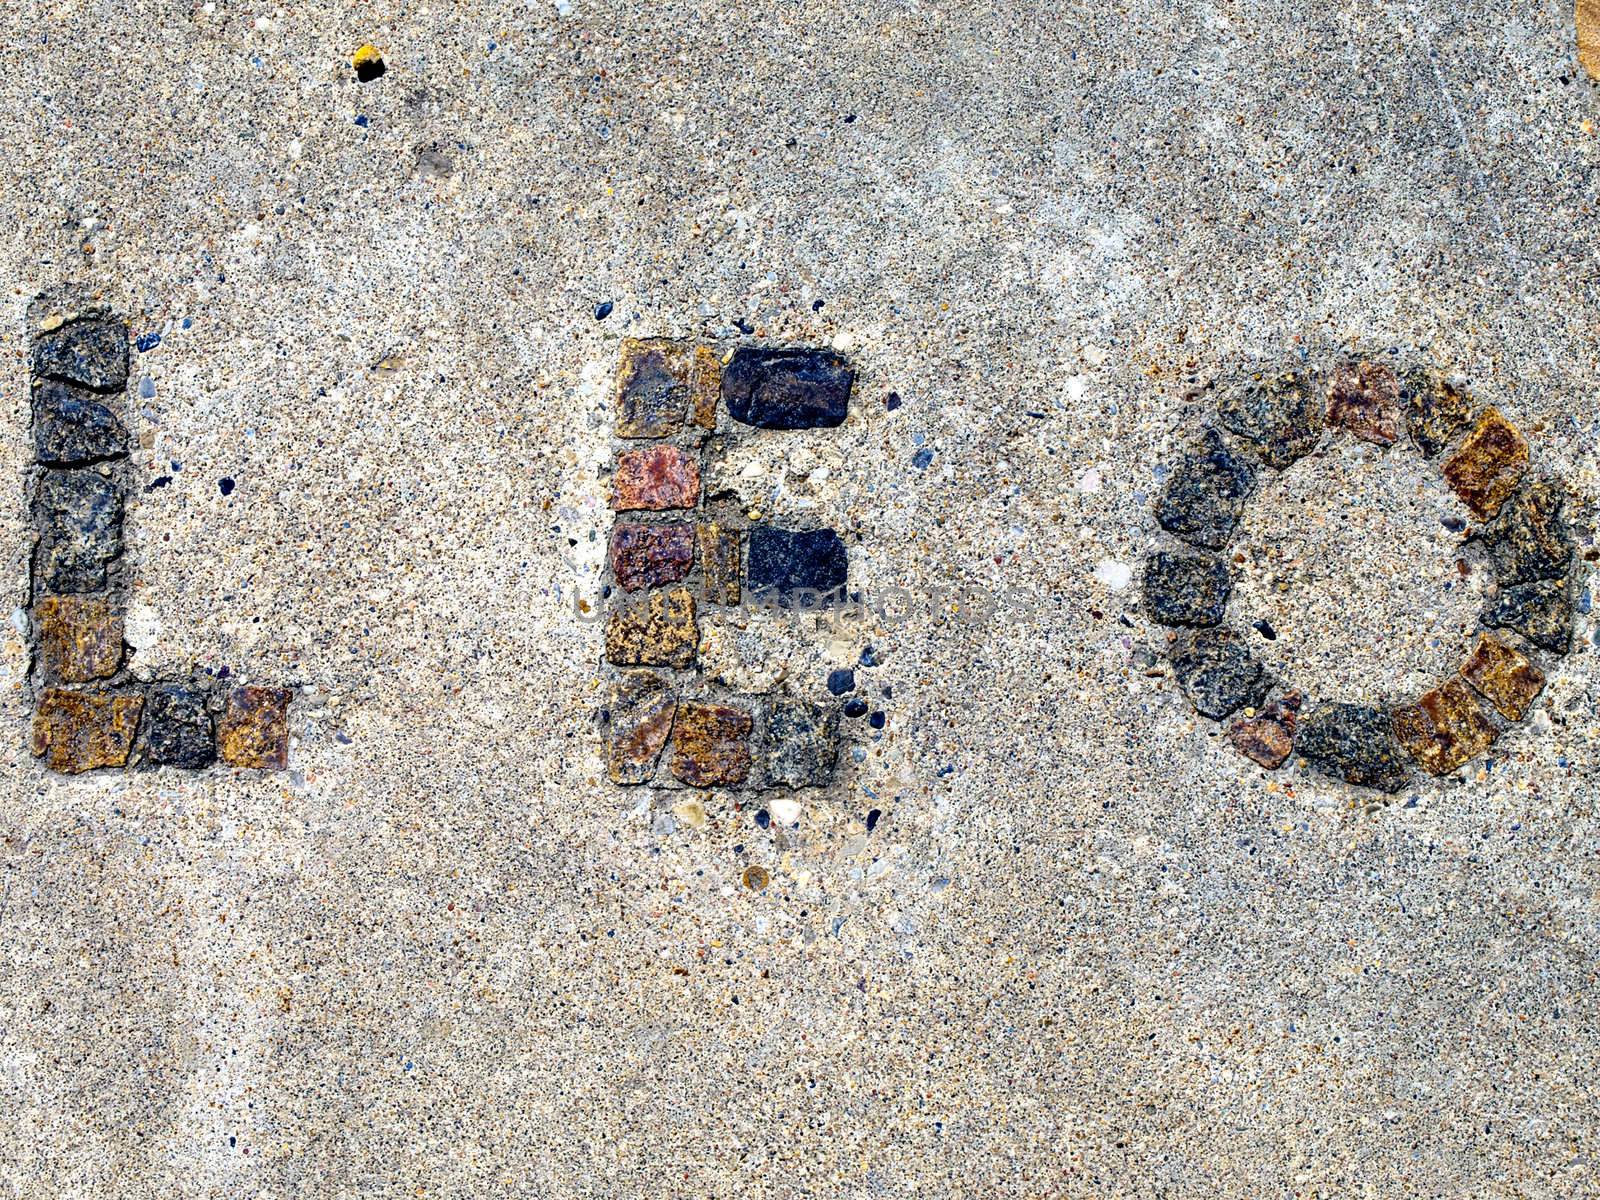 Astrological signs spelled out with inlayed tiles in cement.